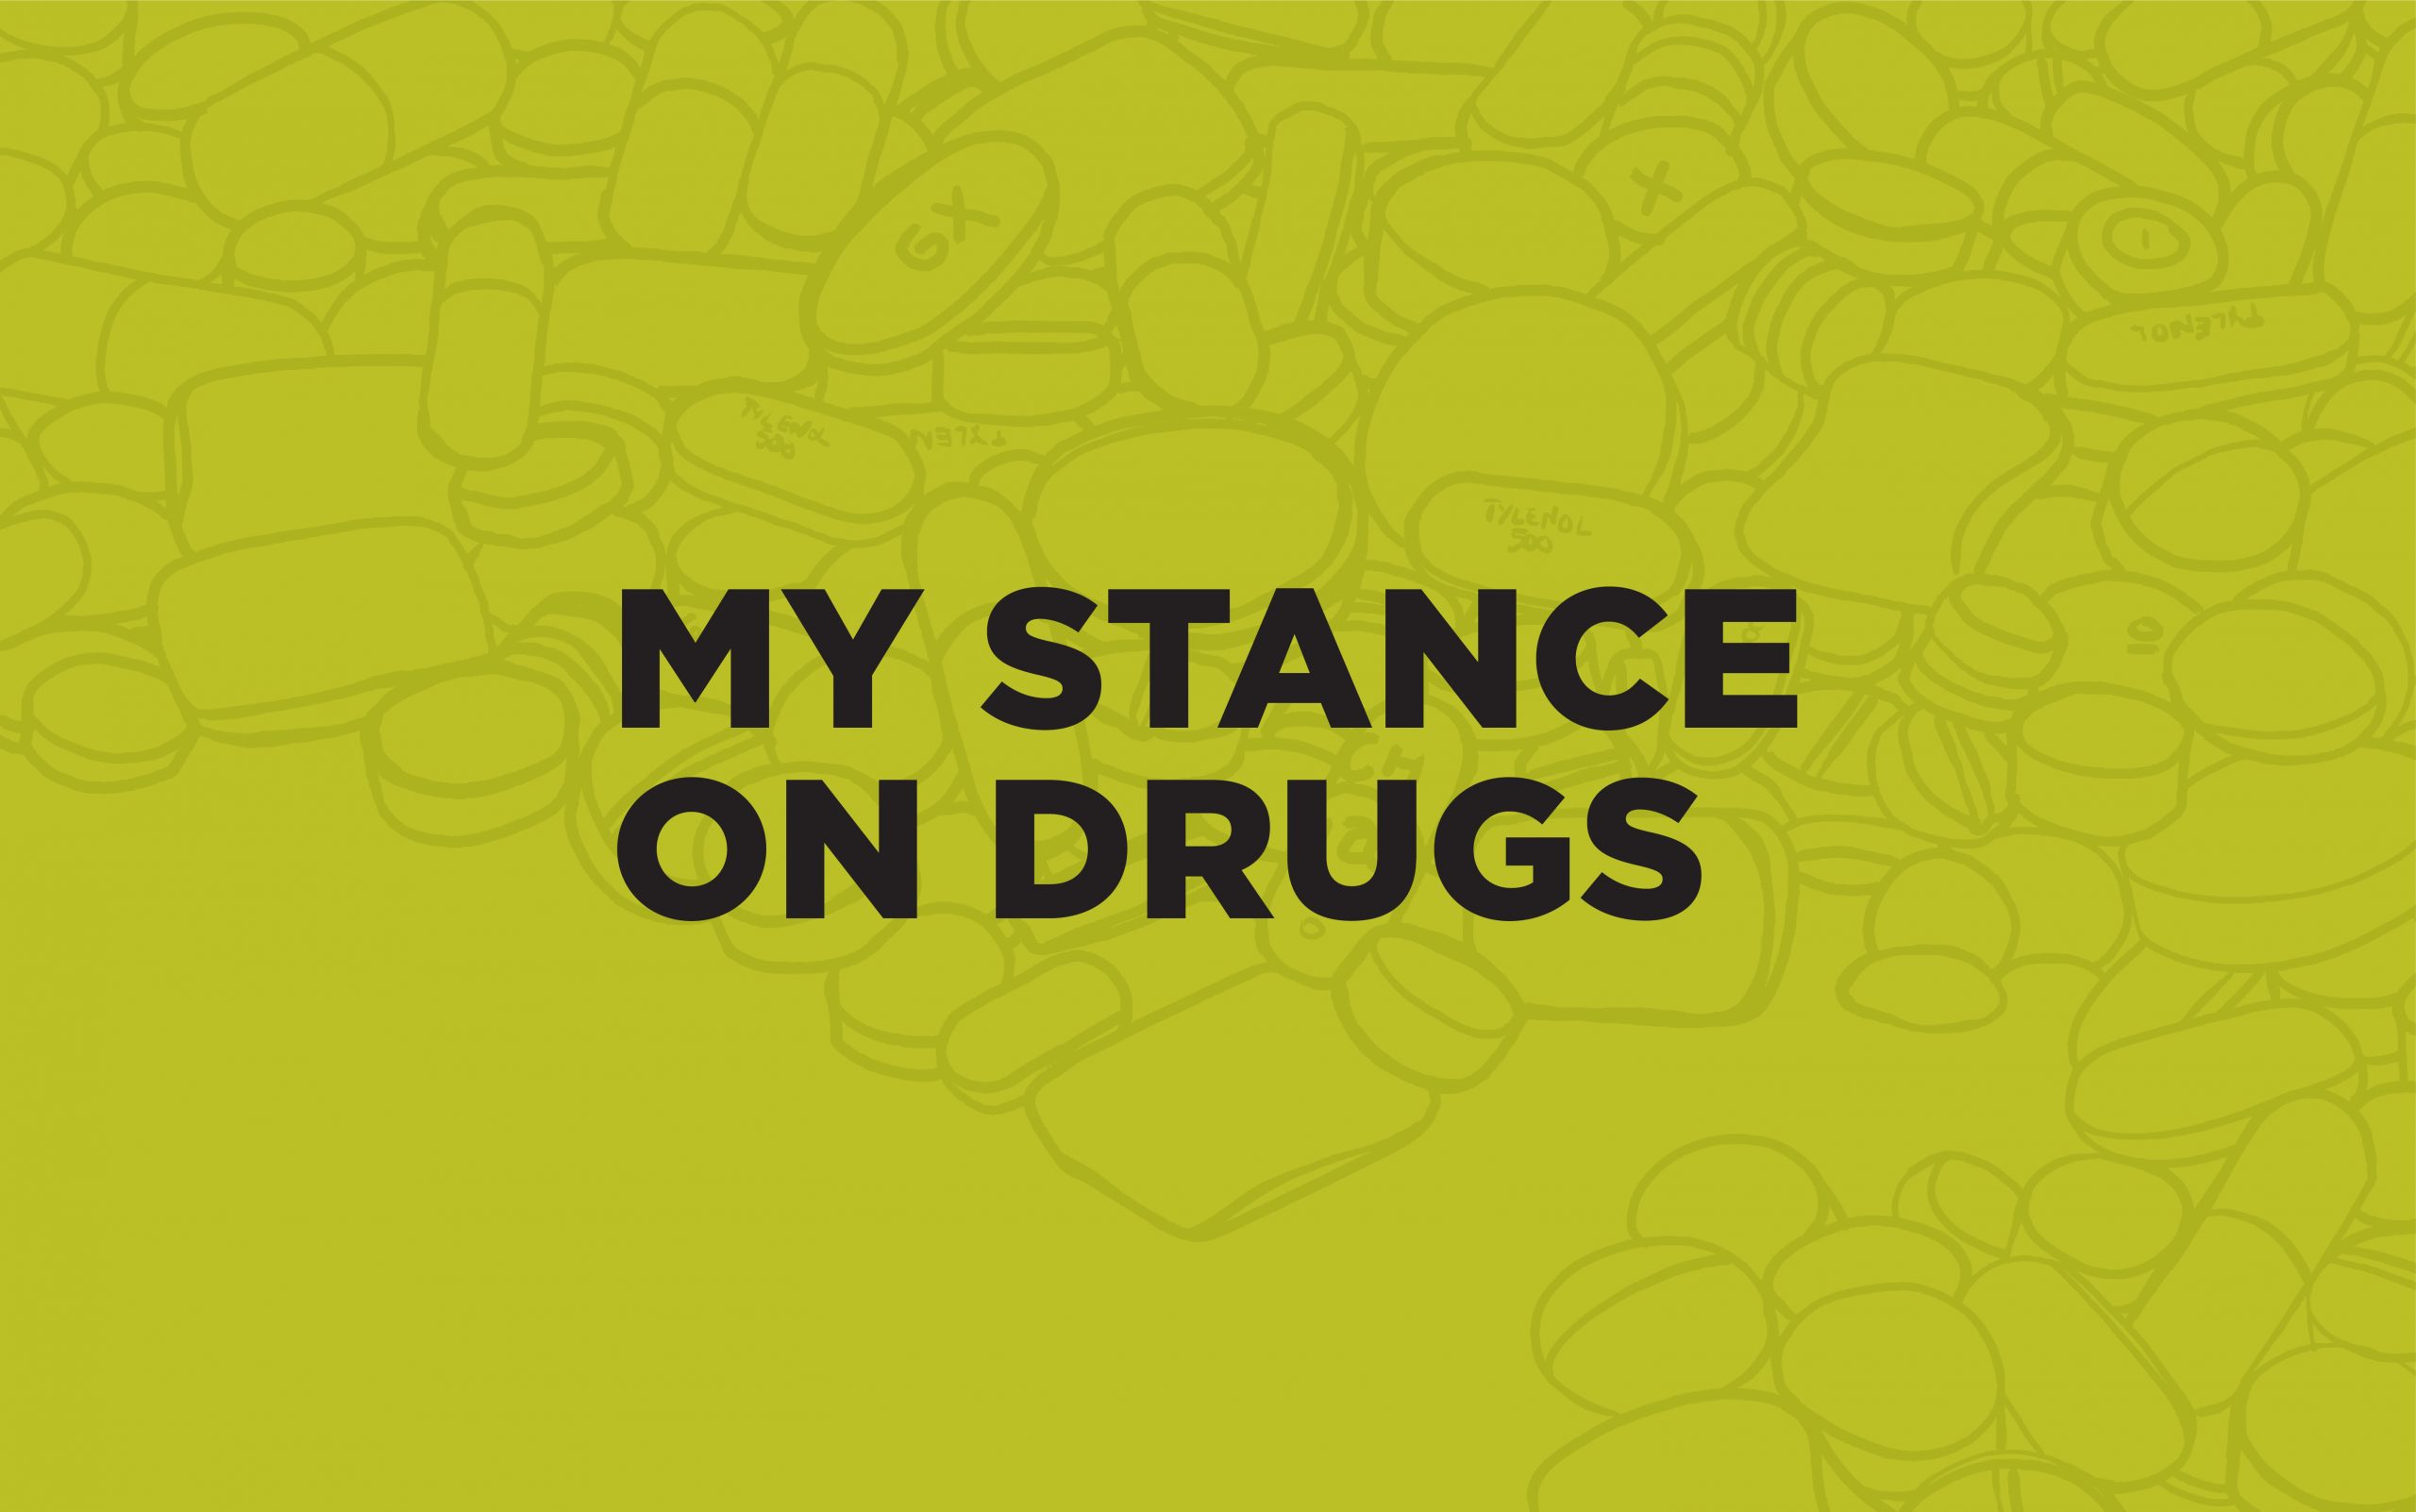 My stance on drugs - a personal story of a college woman and her older brother struggling with drug abuse